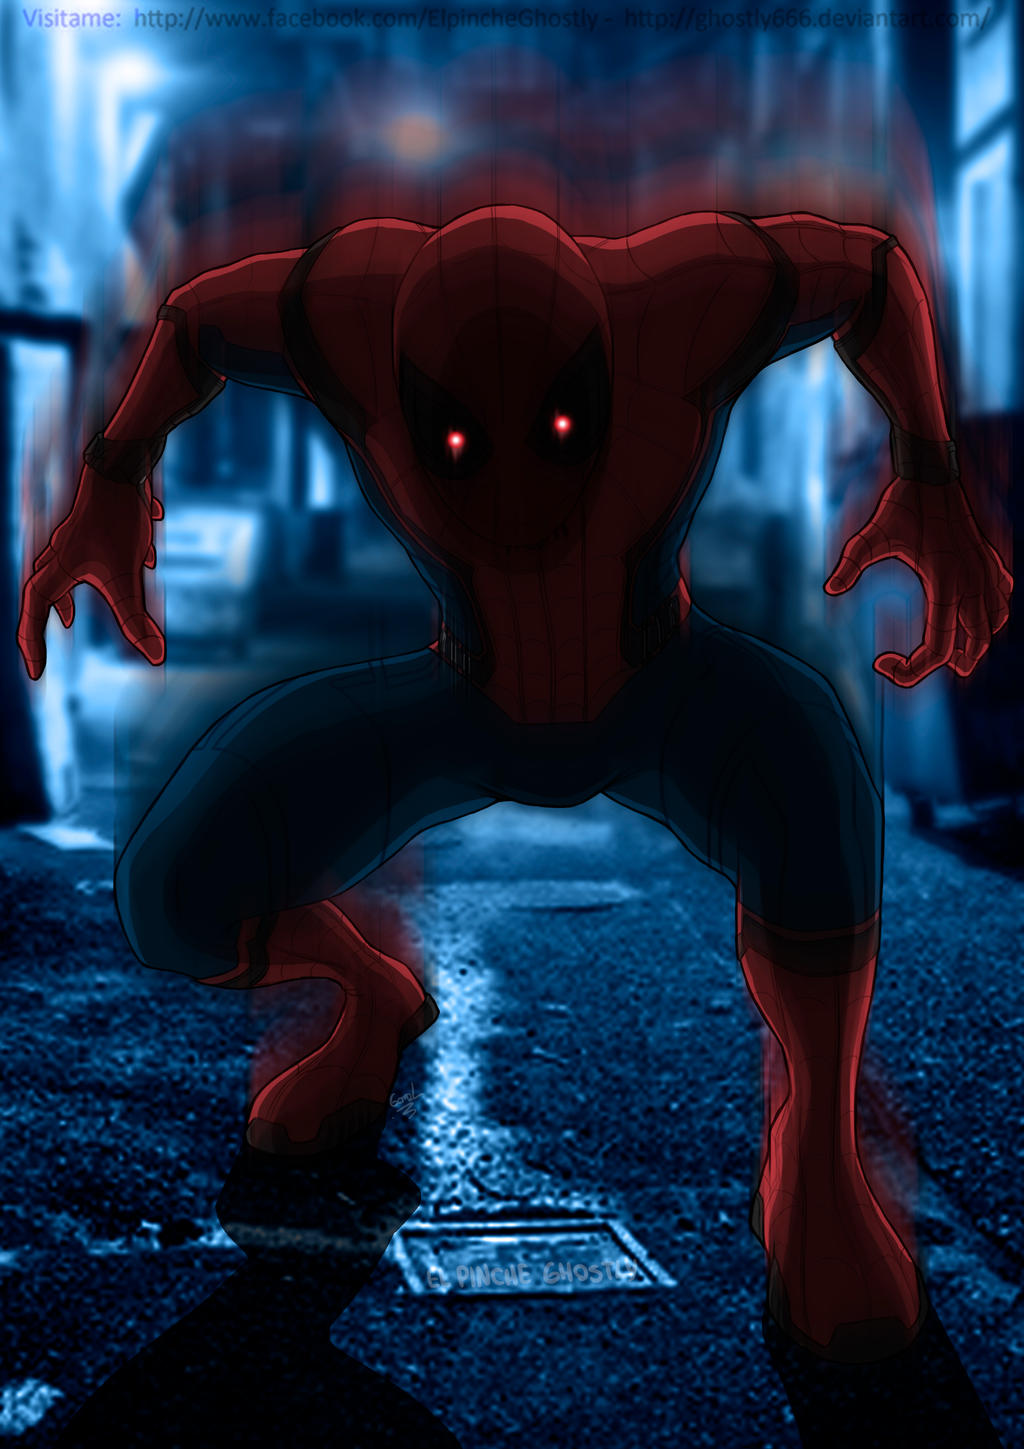 SPIDERMAN INSTANT KILL by ghostly666 on DeviantArt